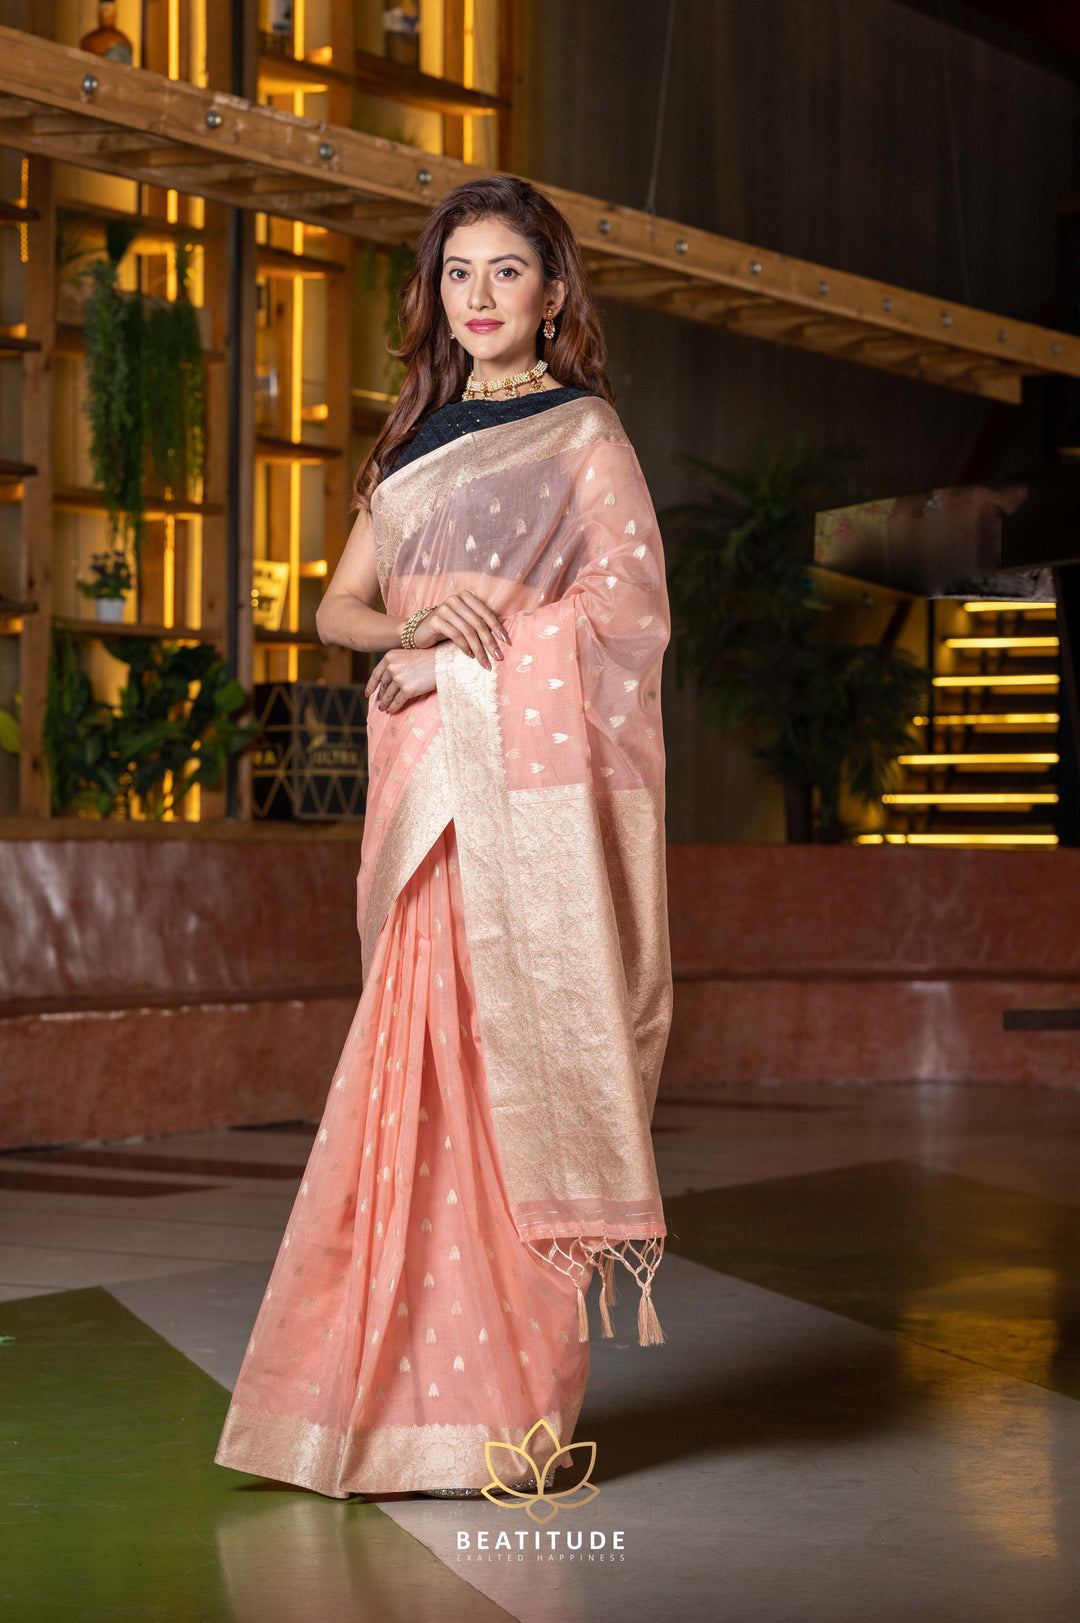 Beatitude Peach Coloured Silver Toned Floral Saree with Unstitched Blouse